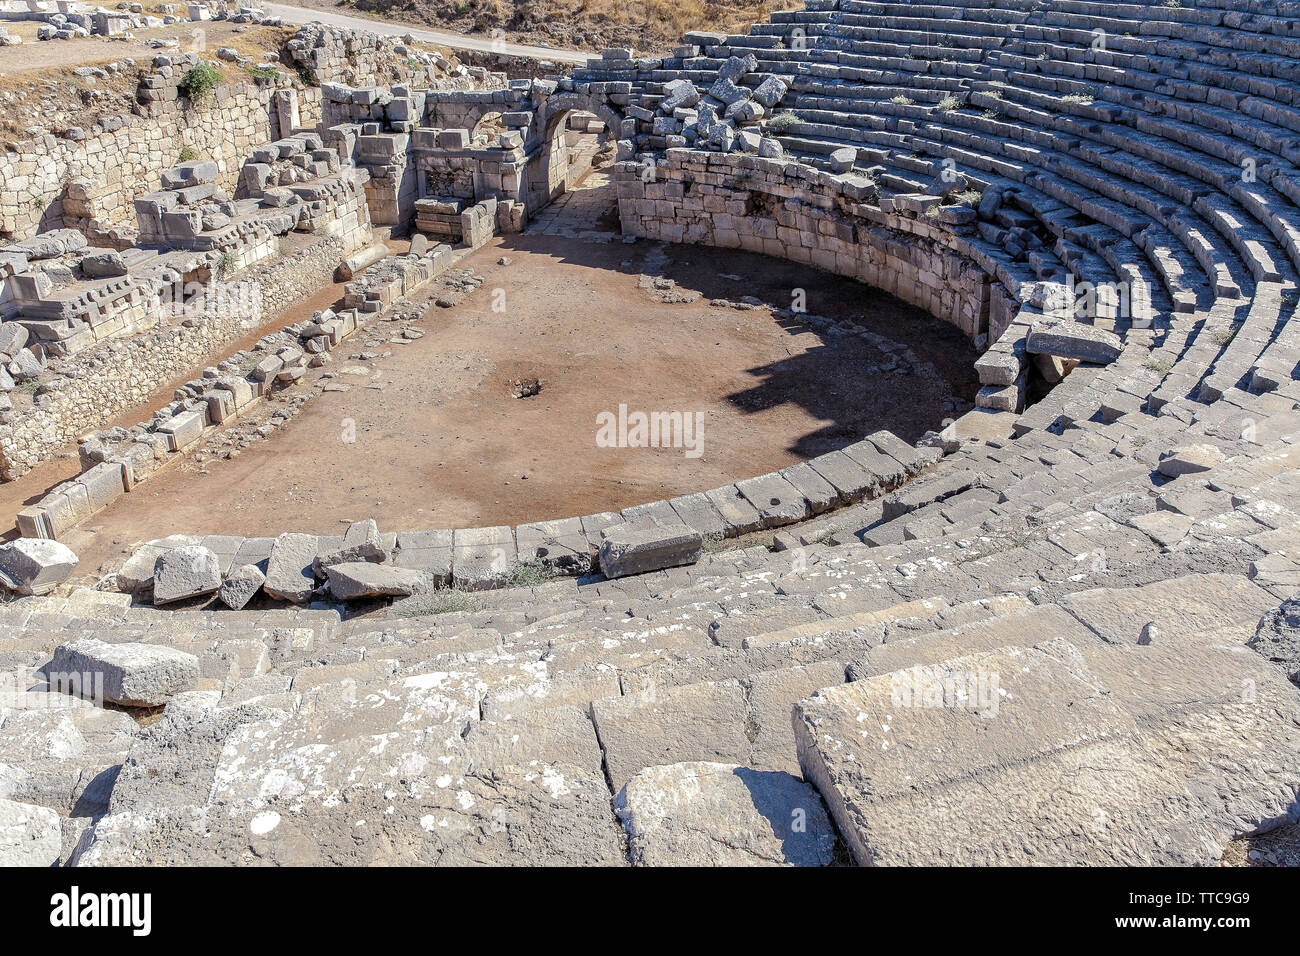 Turkey, the ancient city of Xanthos theater in the city of Antalya. Stock Photo